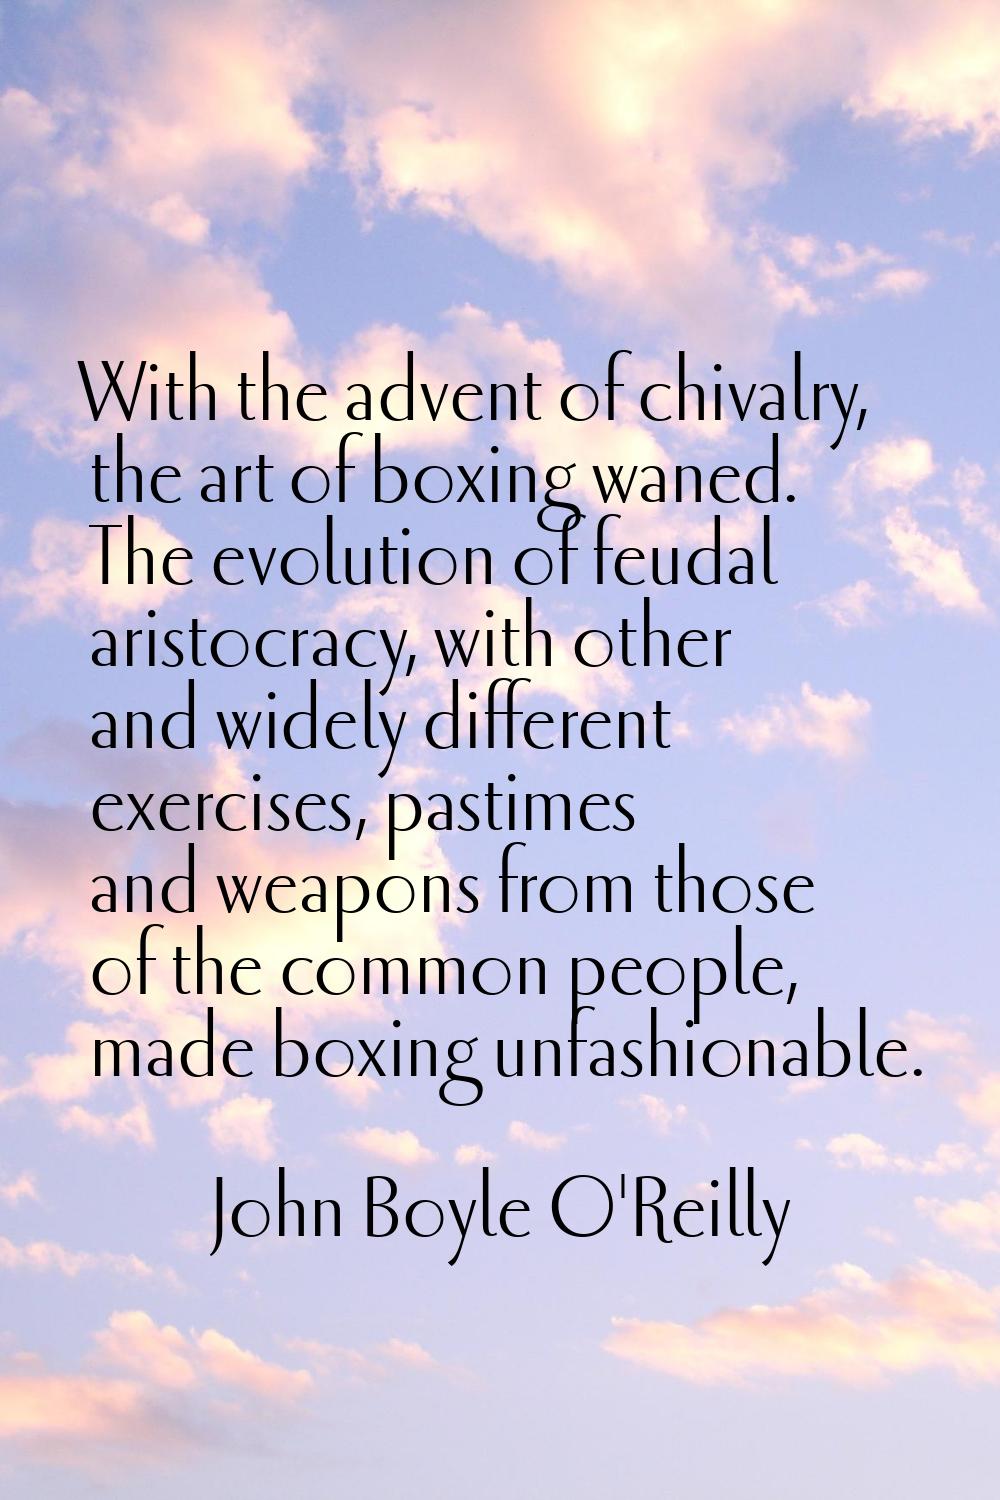 With the advent of chivalry, the art of boxing waned. The evolution of feudal aristocracy, with oth